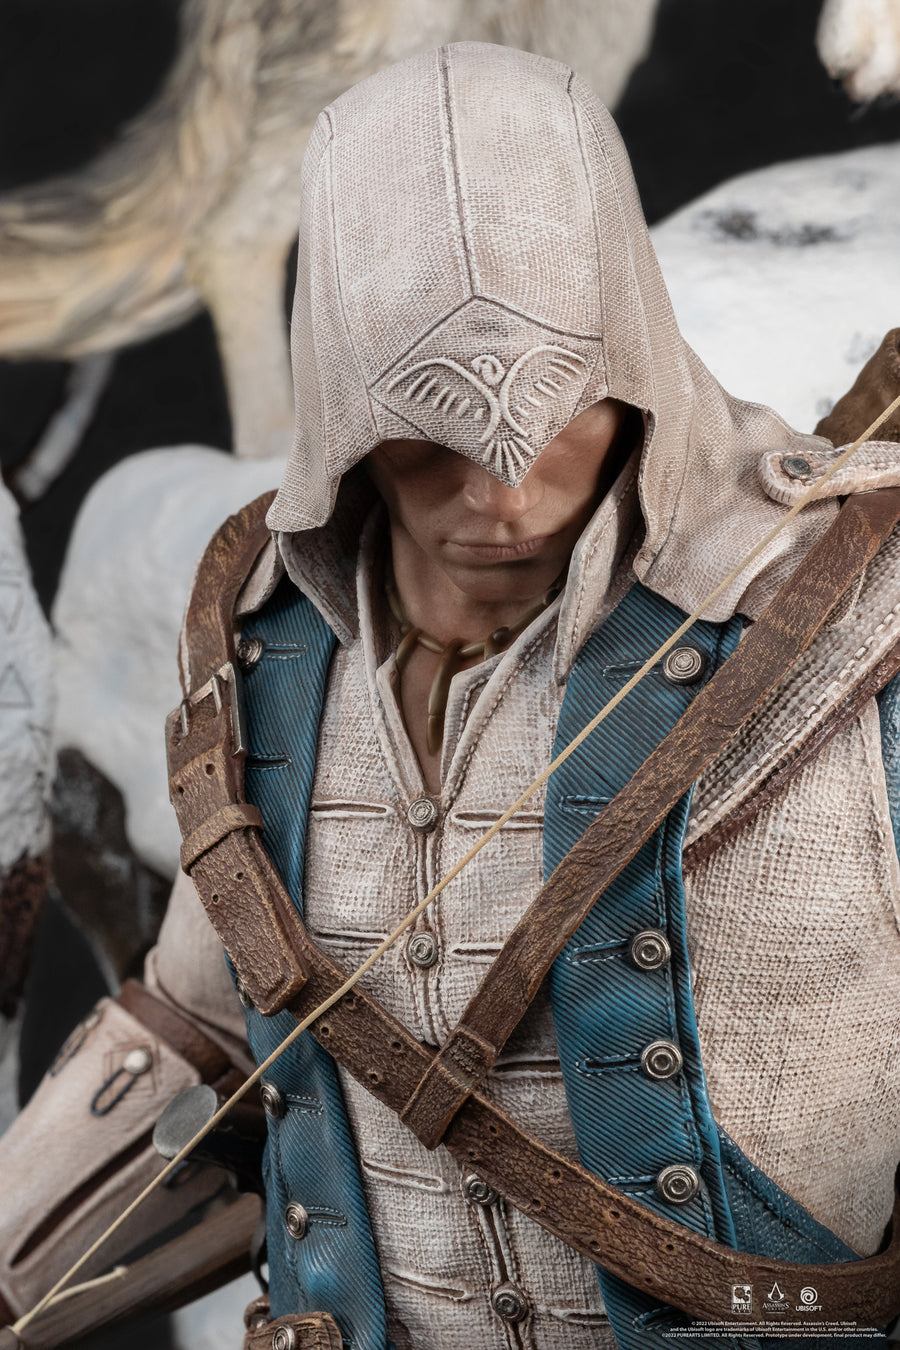 Connor Kenway Joins The PureArts 'Assassin's Creed' Statue Series